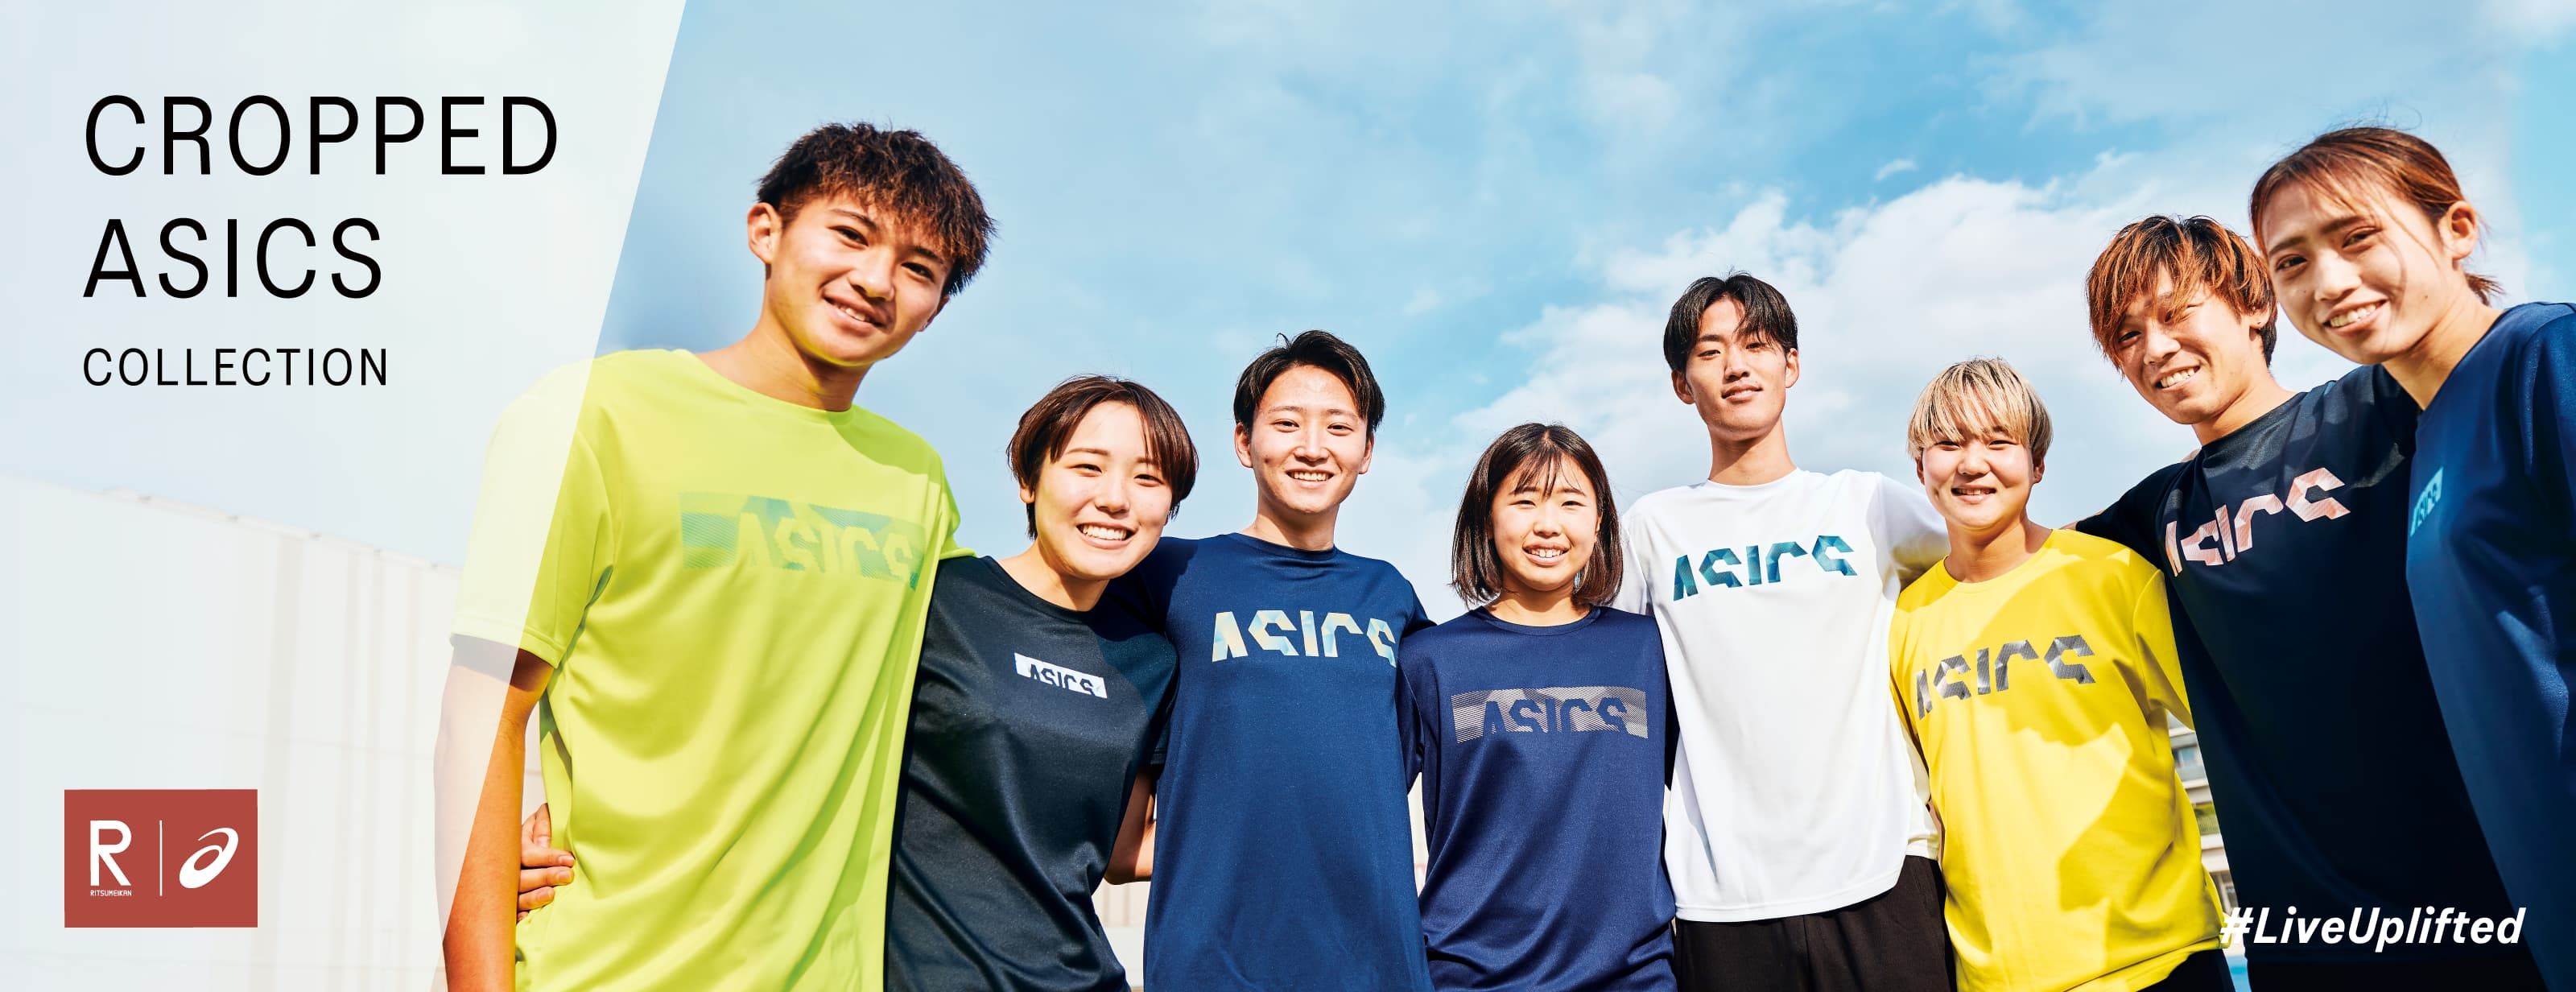 cropped asics collection バナー 22ss